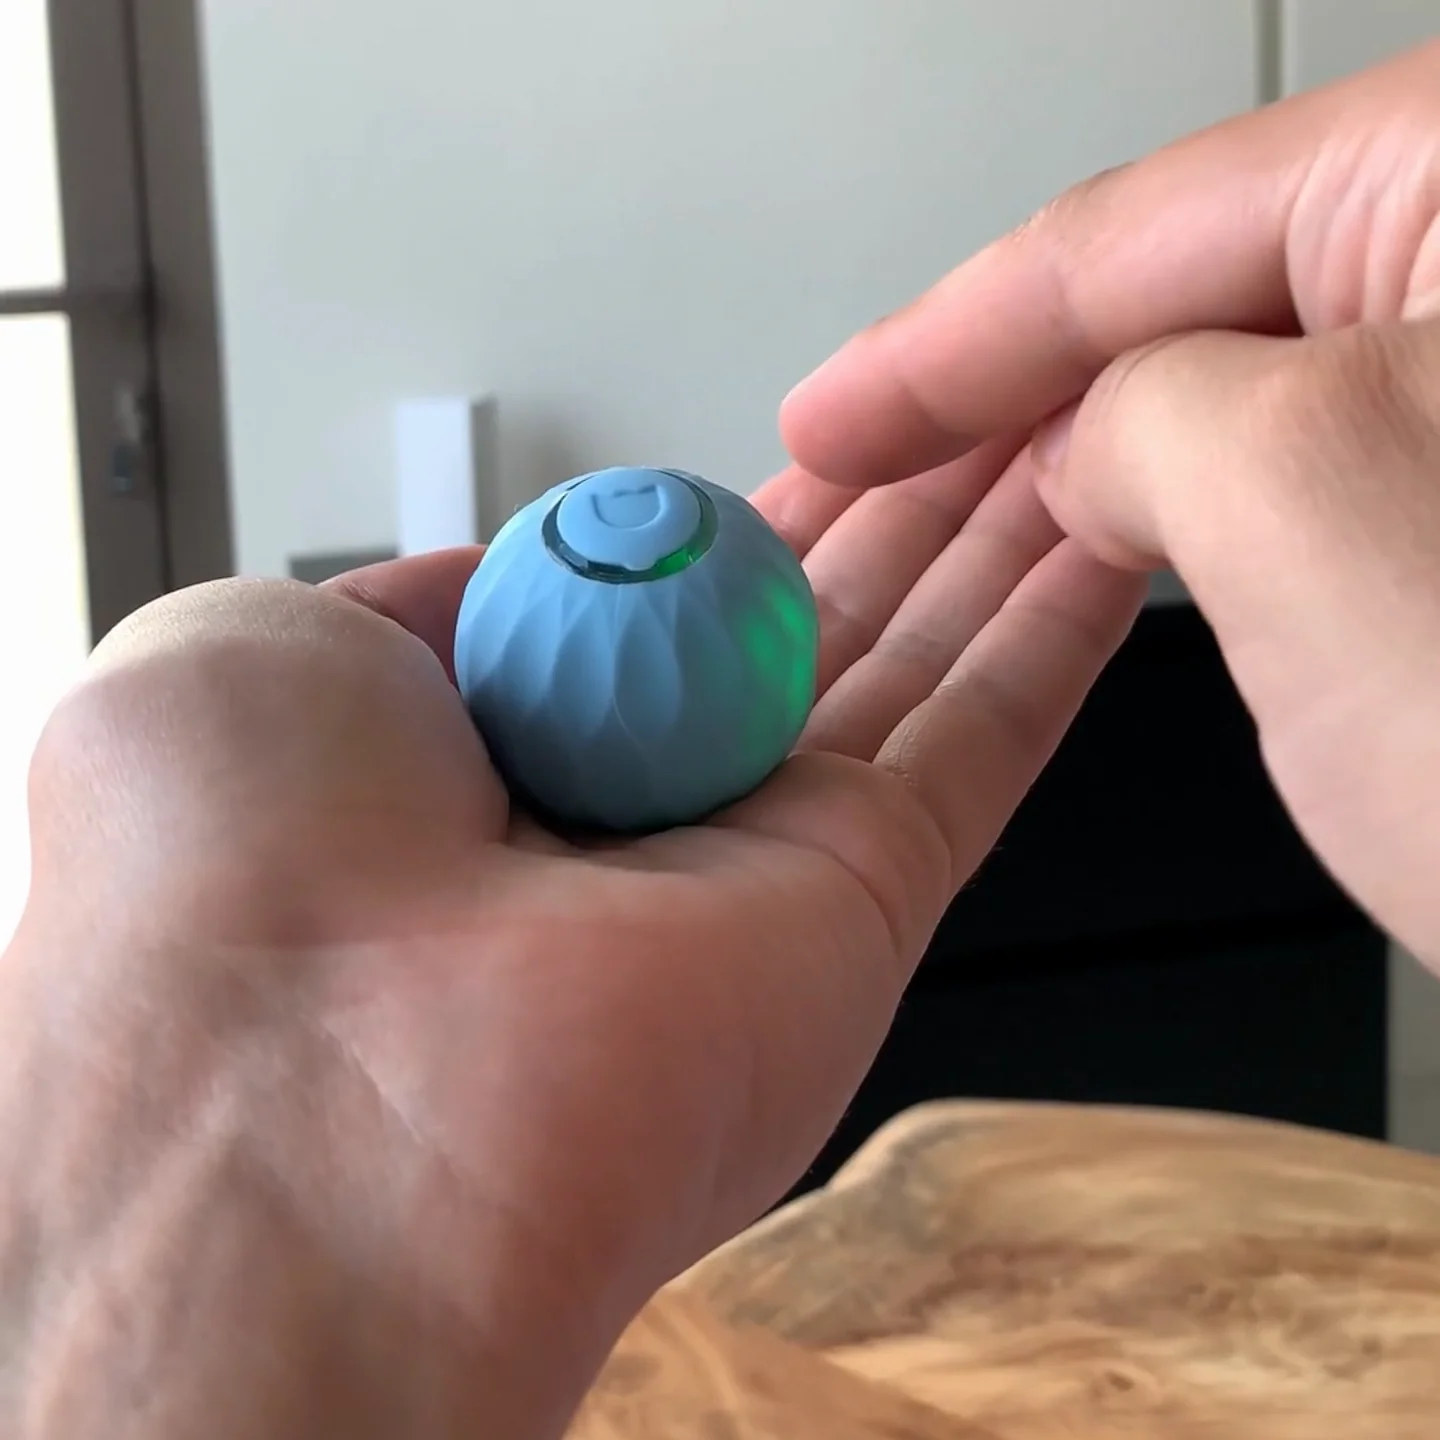 WLOOM Power Ball 2.0 - Touch Trigger on Vimeo